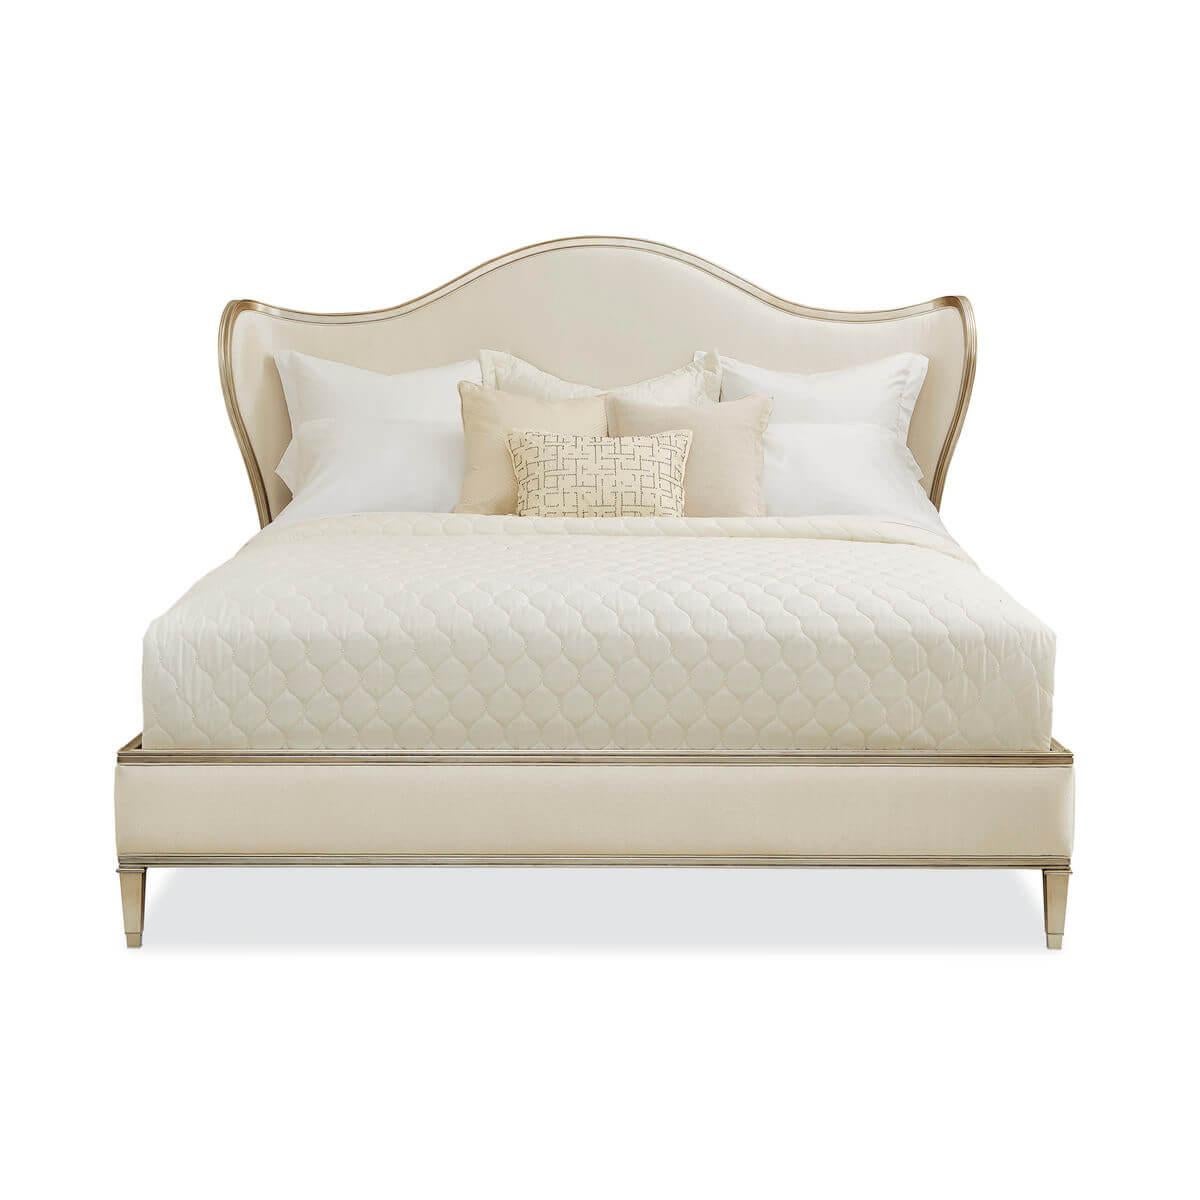 Queen Bed with a serpentine headboard and curved wings. The exposed carved wood rail is finished in radiant Auric silver leaf. Fully upholstered in a cream fabric. This piece has a low footboard and square-tapered carved feet.

Dimensions: 76